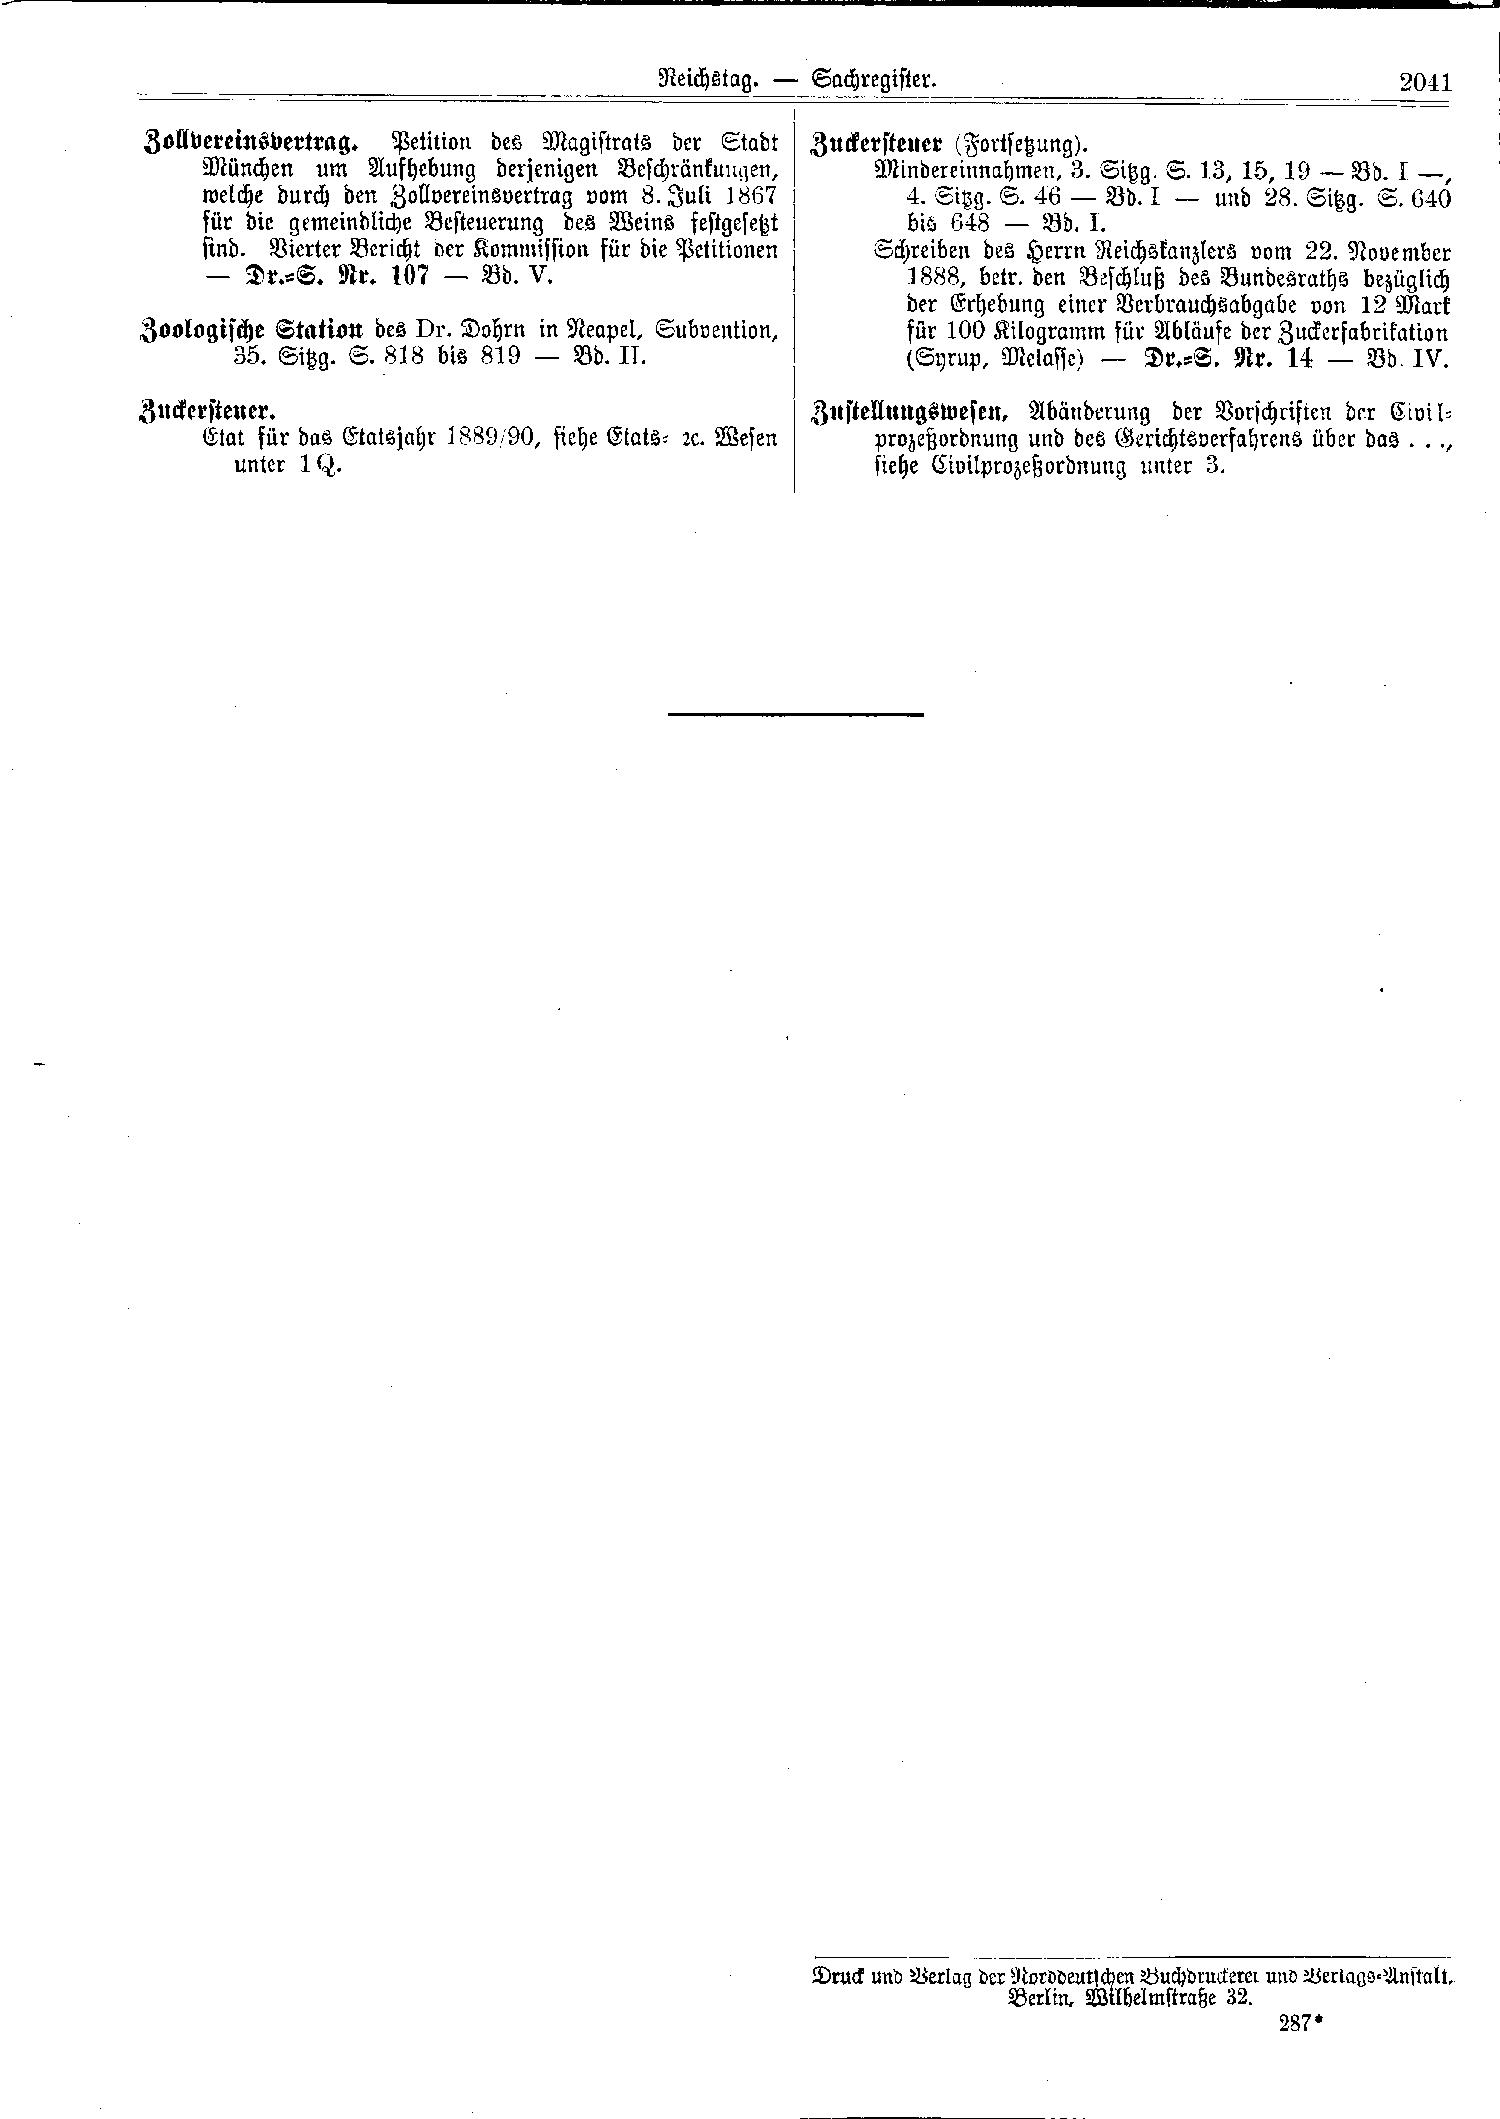 Scan of page 2041